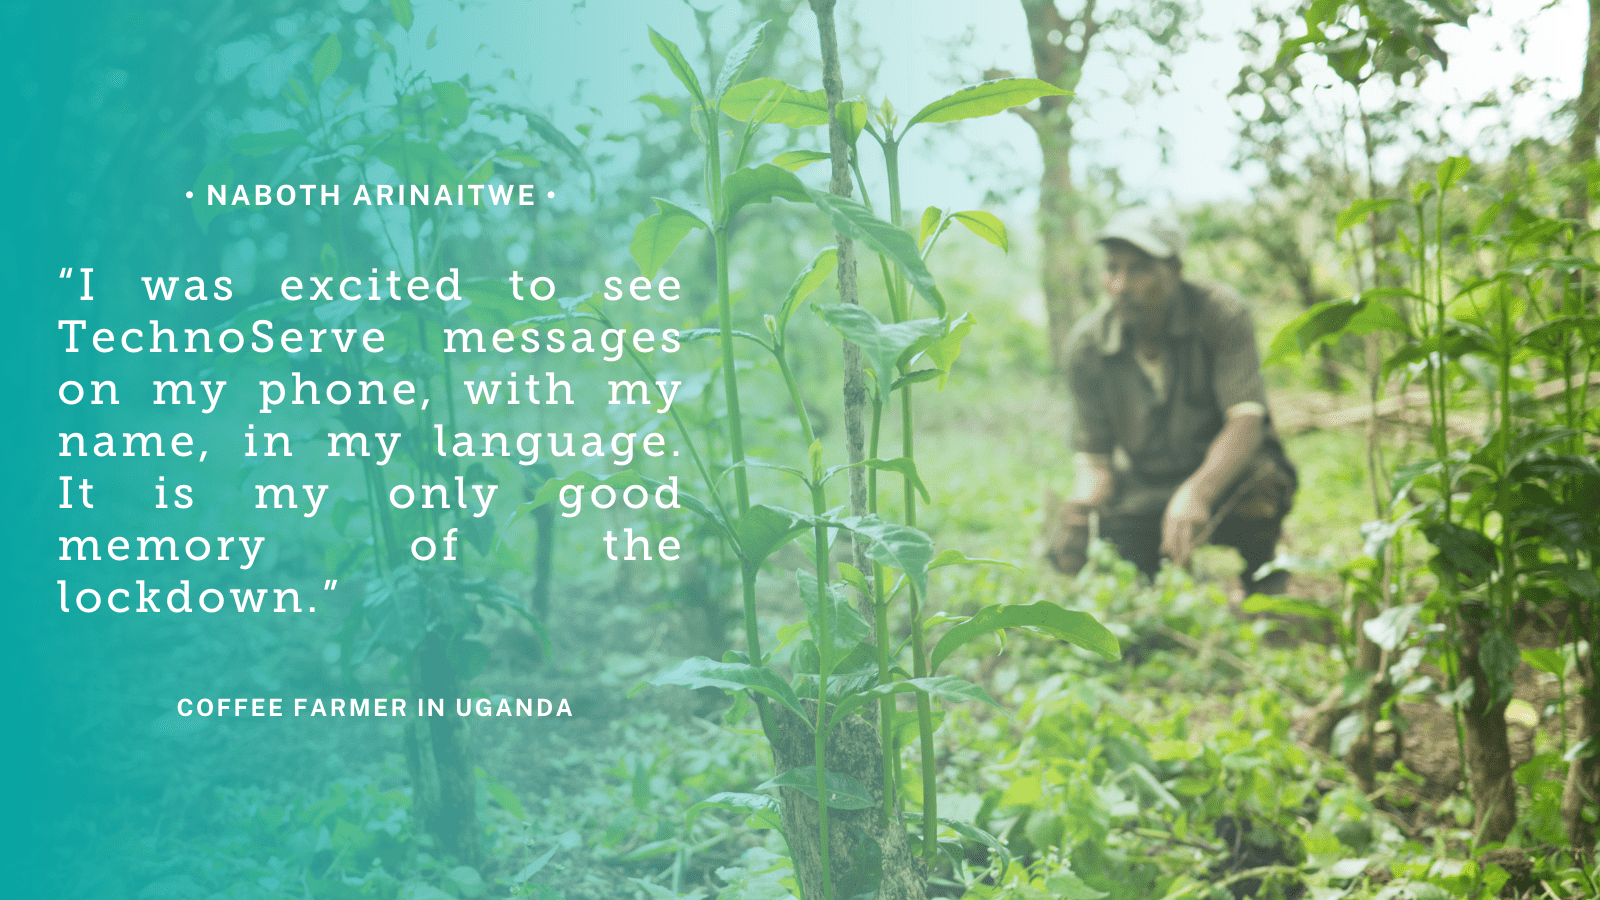 Teal quote graphic reads: “I was excited to see TechnoServe messages on my phone, with my name, in my language. It is my only good memory of the lockdown.” -Naboth Arinaitwe, coffee farmer, Uganda